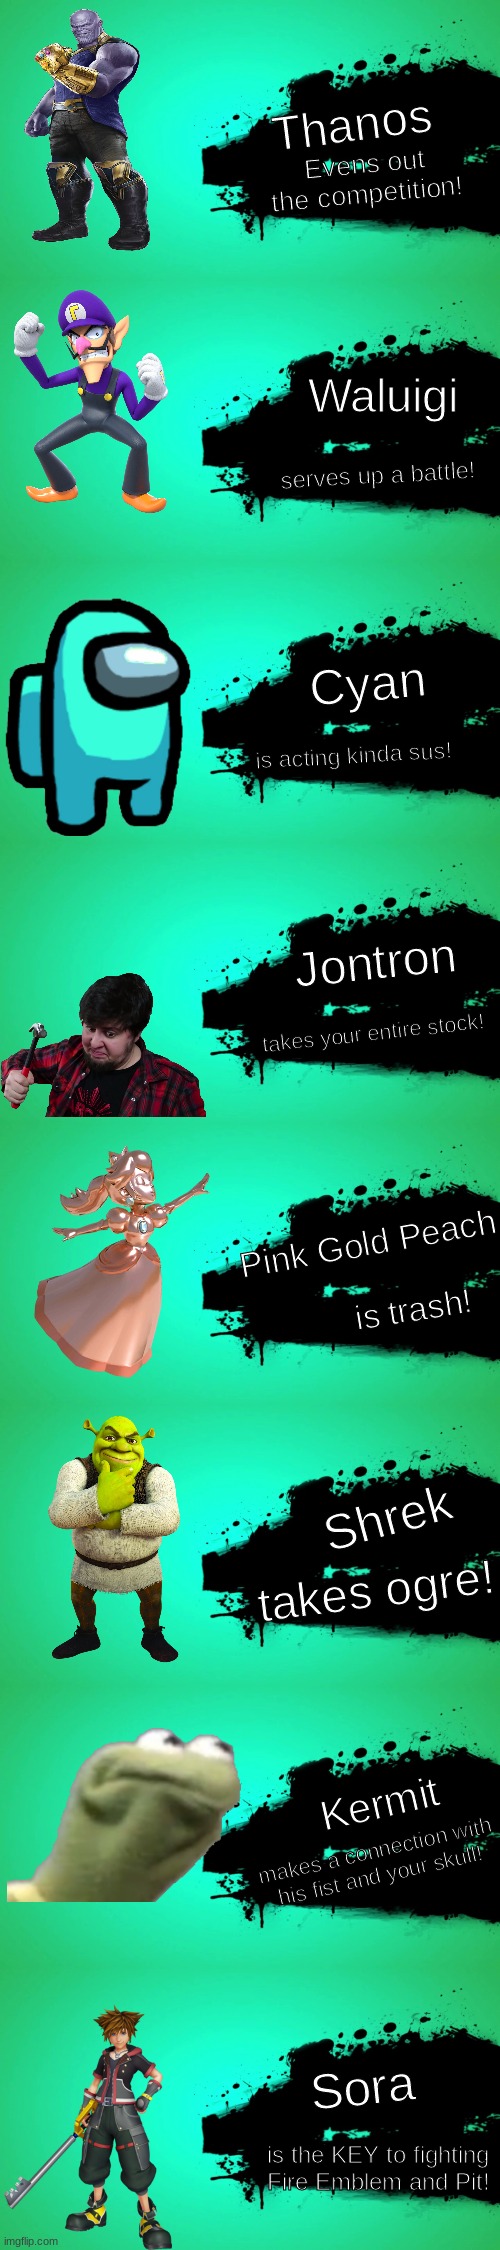 New Smash Bros DLC | Thanos; Evens out the competition! Waluigi; serves up a battle! Cyan; is acting kinda sus! Jontron; takes your entire stock! Pink Gold Peach; is trash! Shrek; takes ogre! Kermit; makes a connection with his fist and your skull! Sora; is the KEY to fighting Fire Emblem and Pit! | image tagged in super smash bros,dlc | made w/ Imgflip meme maker